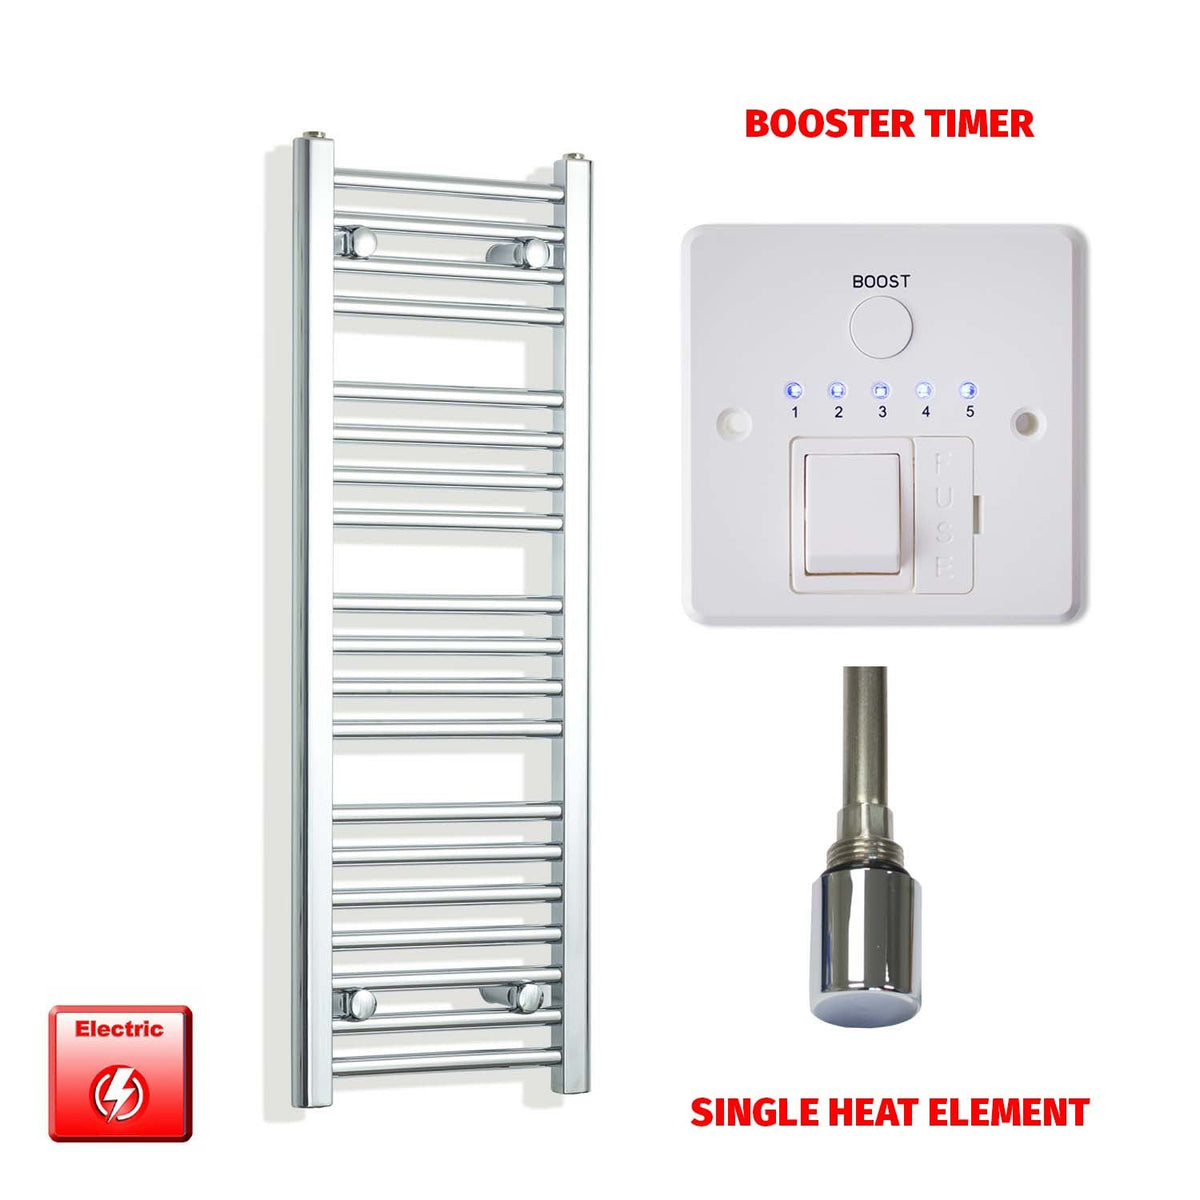 1000mm High 350mm Wide Pre-Filled Electric Heated Towel Rail Radiator Straight Chrome Single heat element Booster timer